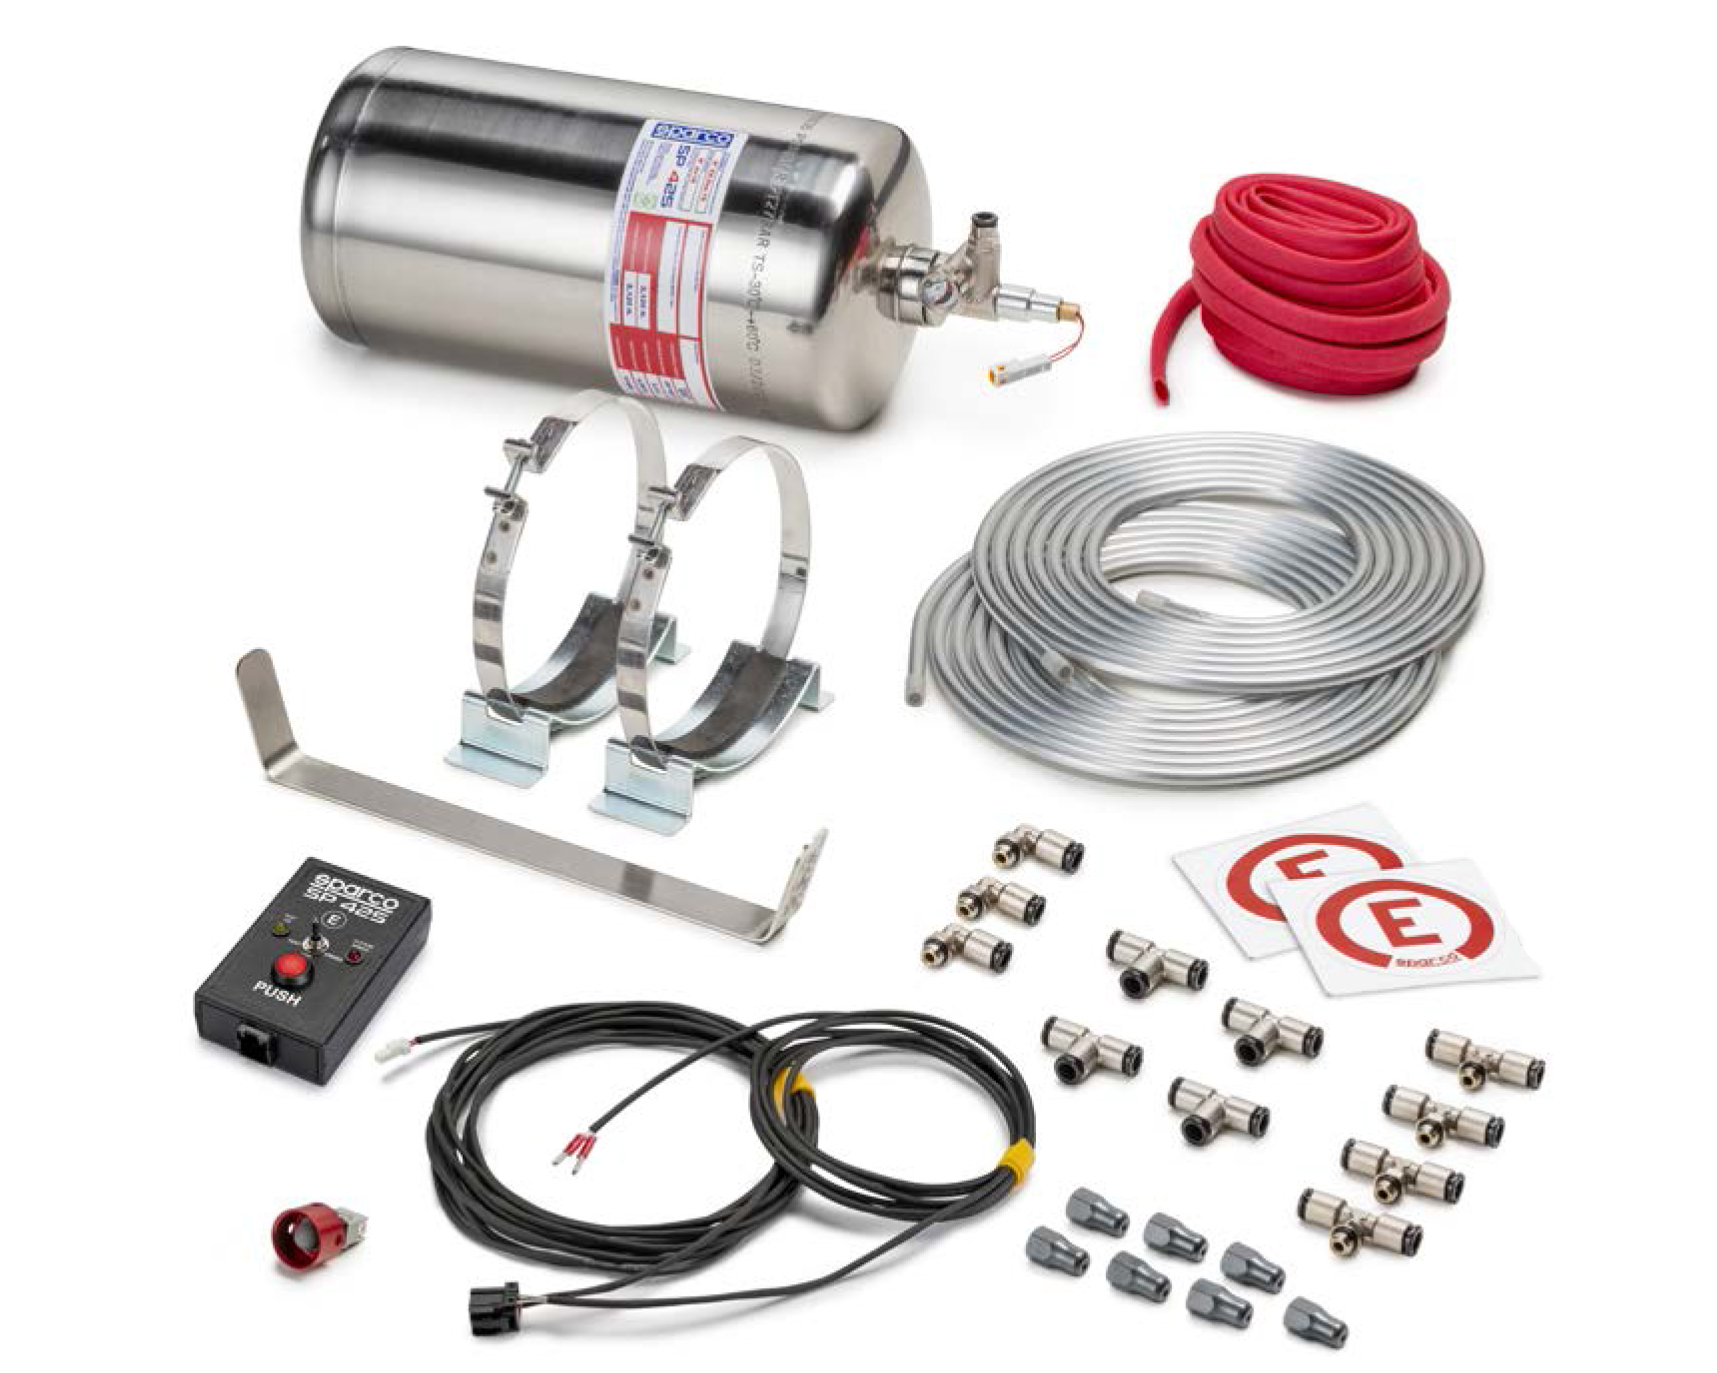 Sparco 014772EXL - Fire Suppression System, Electronic, AFFF, FIA Approved, 4.25 L Bottle, Controller / Fittings / Hose, Kit